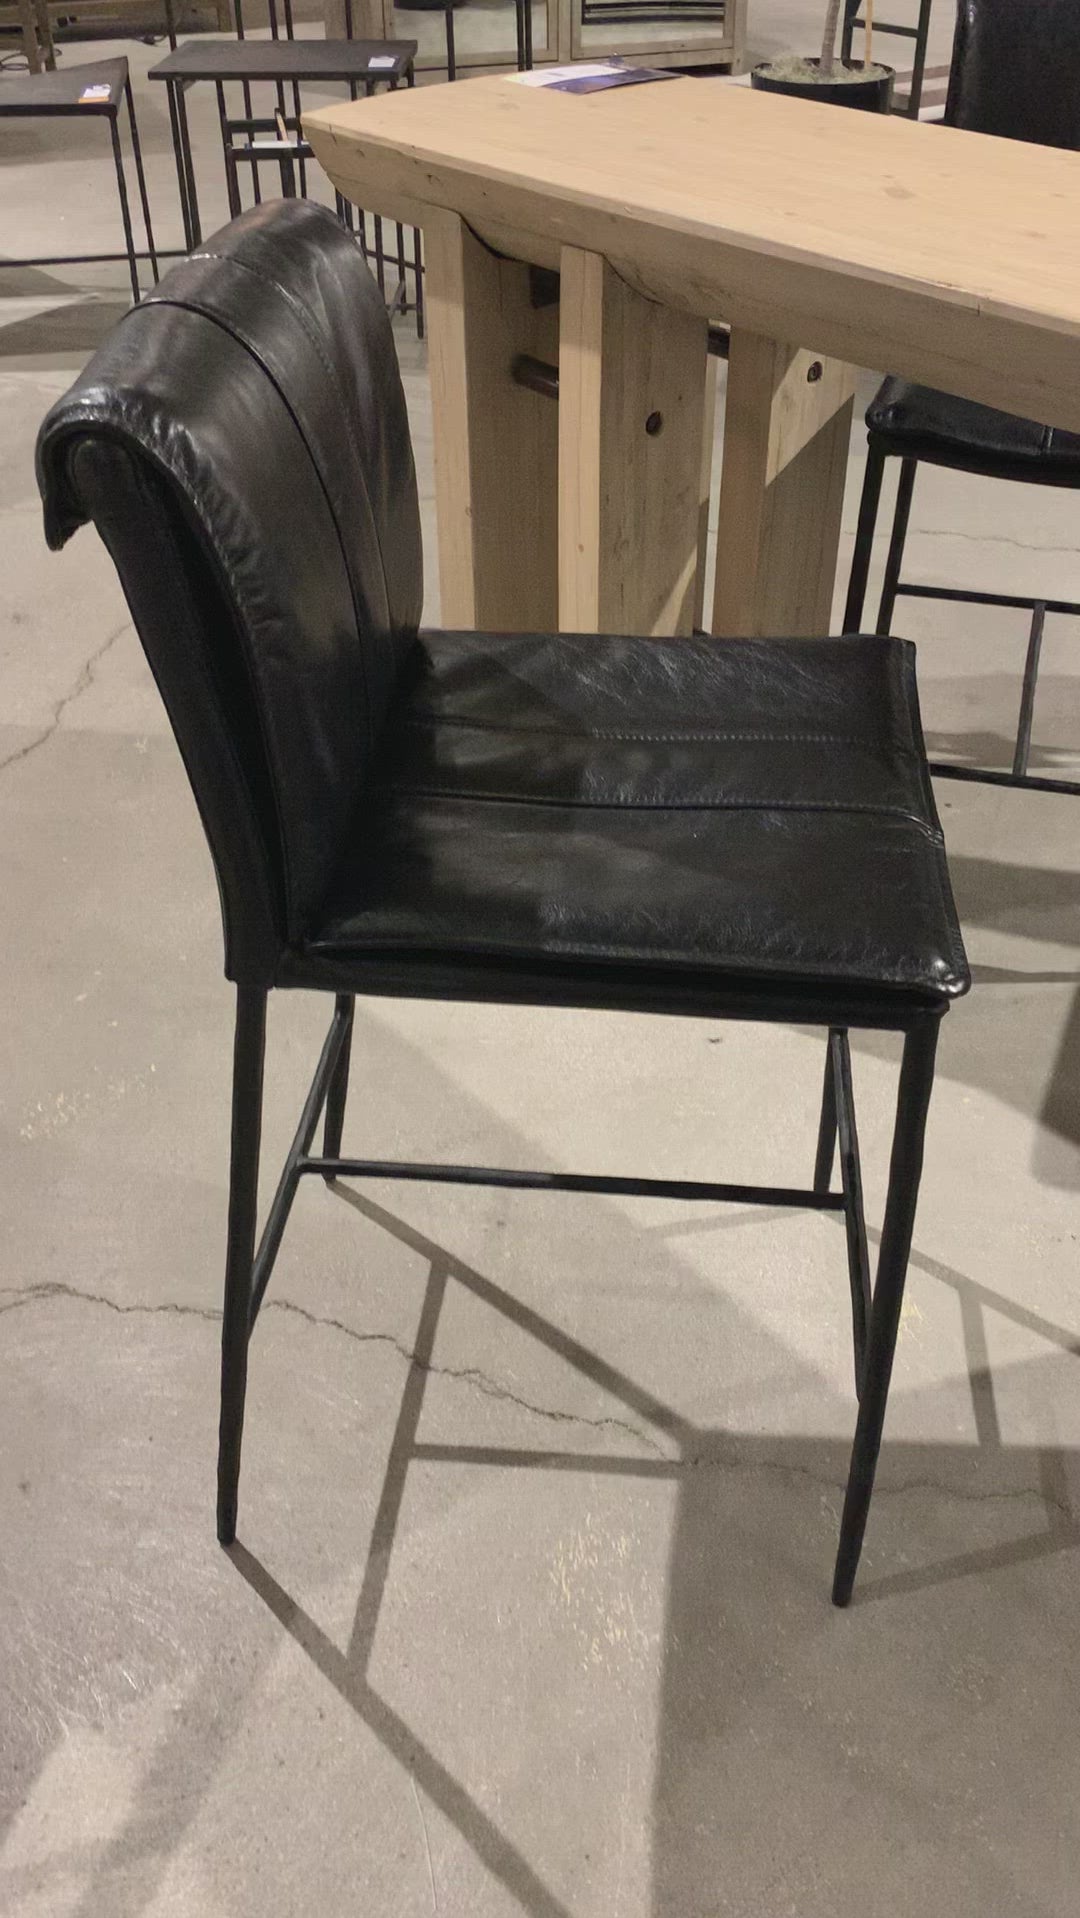 We the love the sleek look the black top grain leather brings to this Mayer Bar + Counter Stool - Black -- the perfect stool for any kitchen or bar area. 